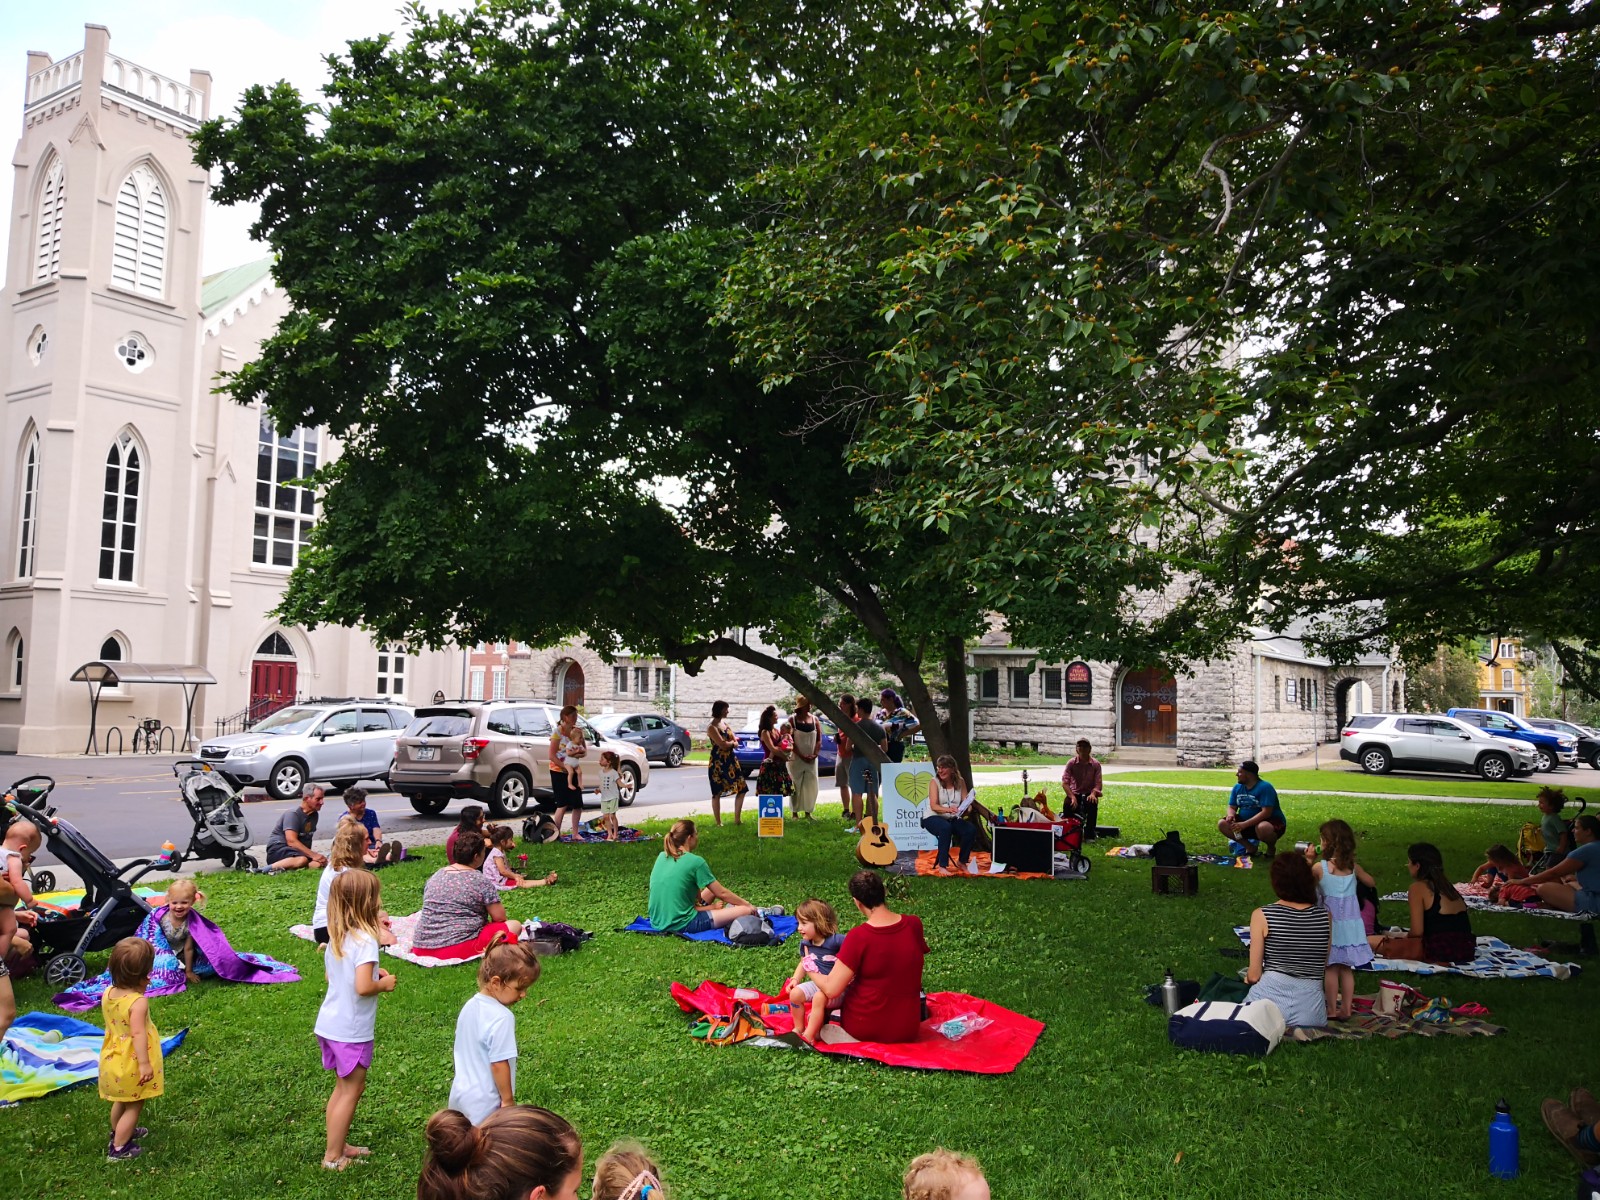 Photo of storytime happening in the park